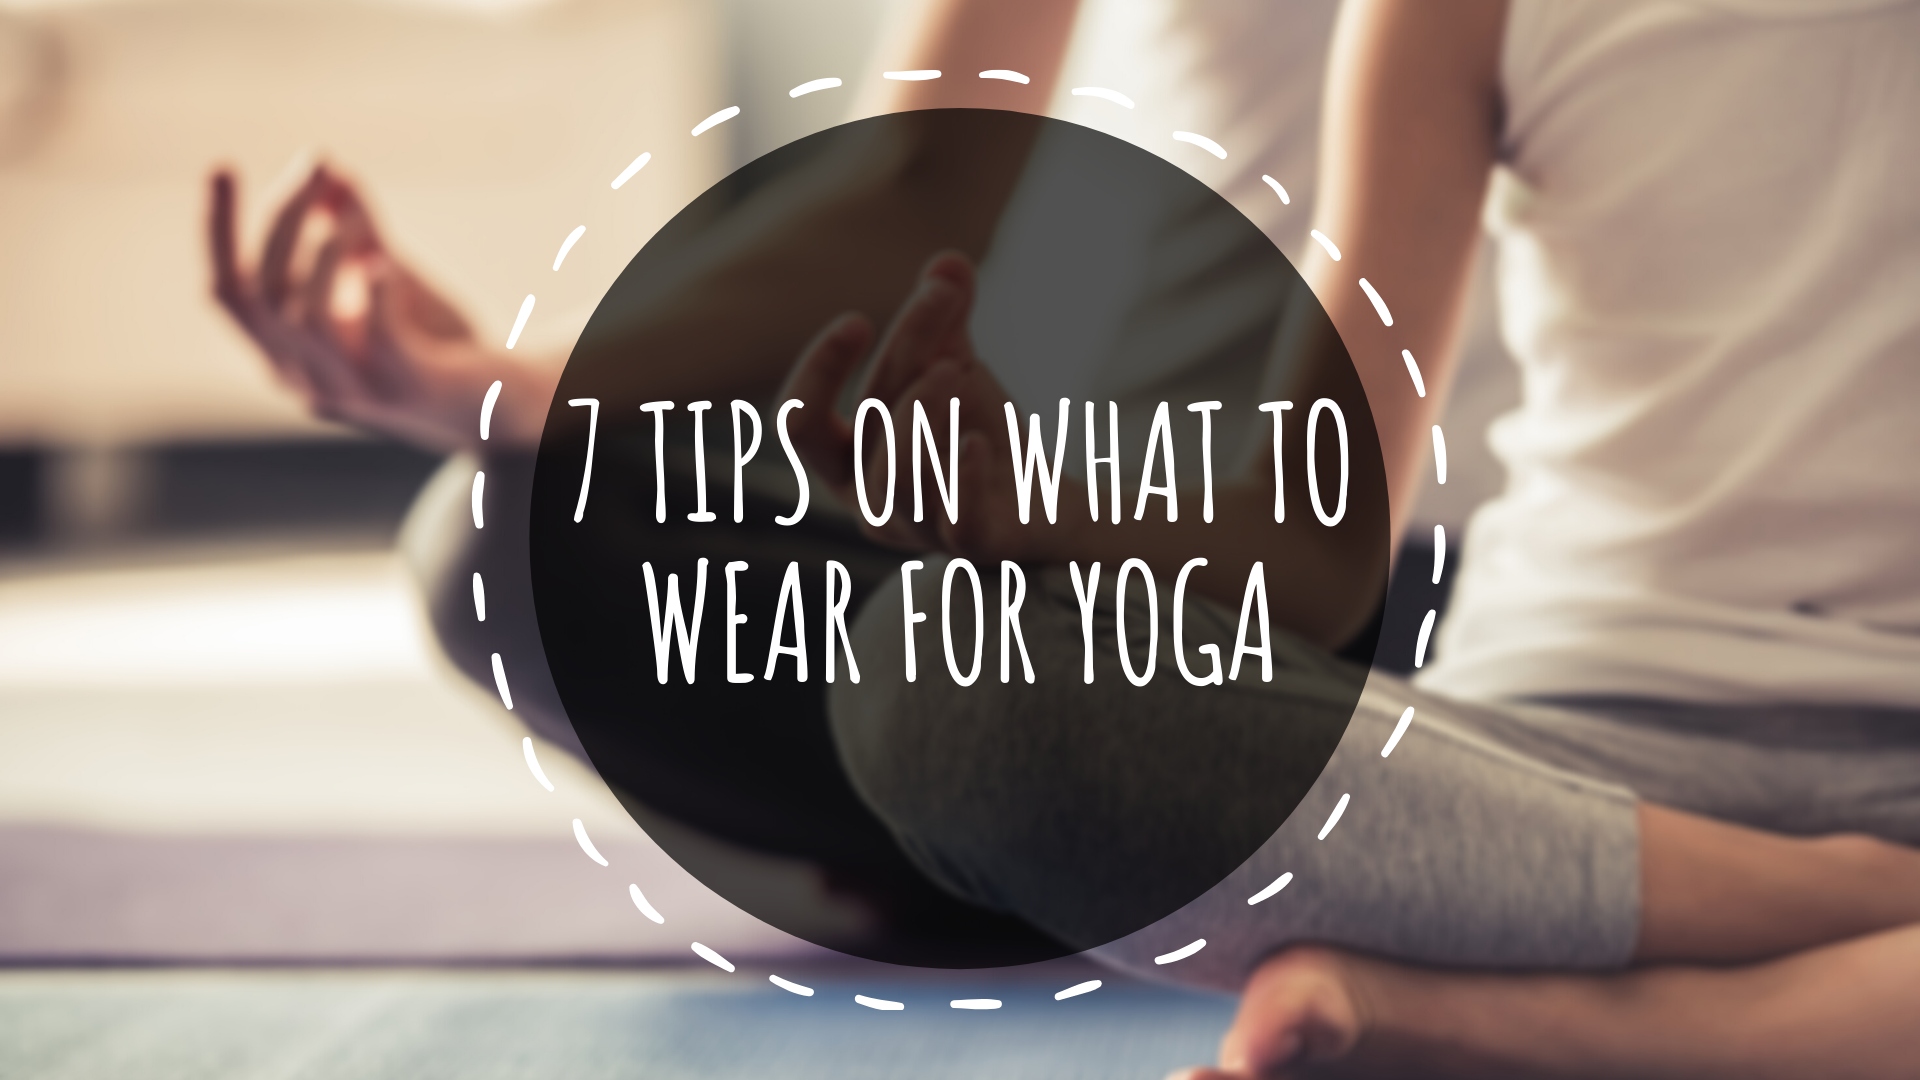 7 Tips On What To Wear For Yoga 